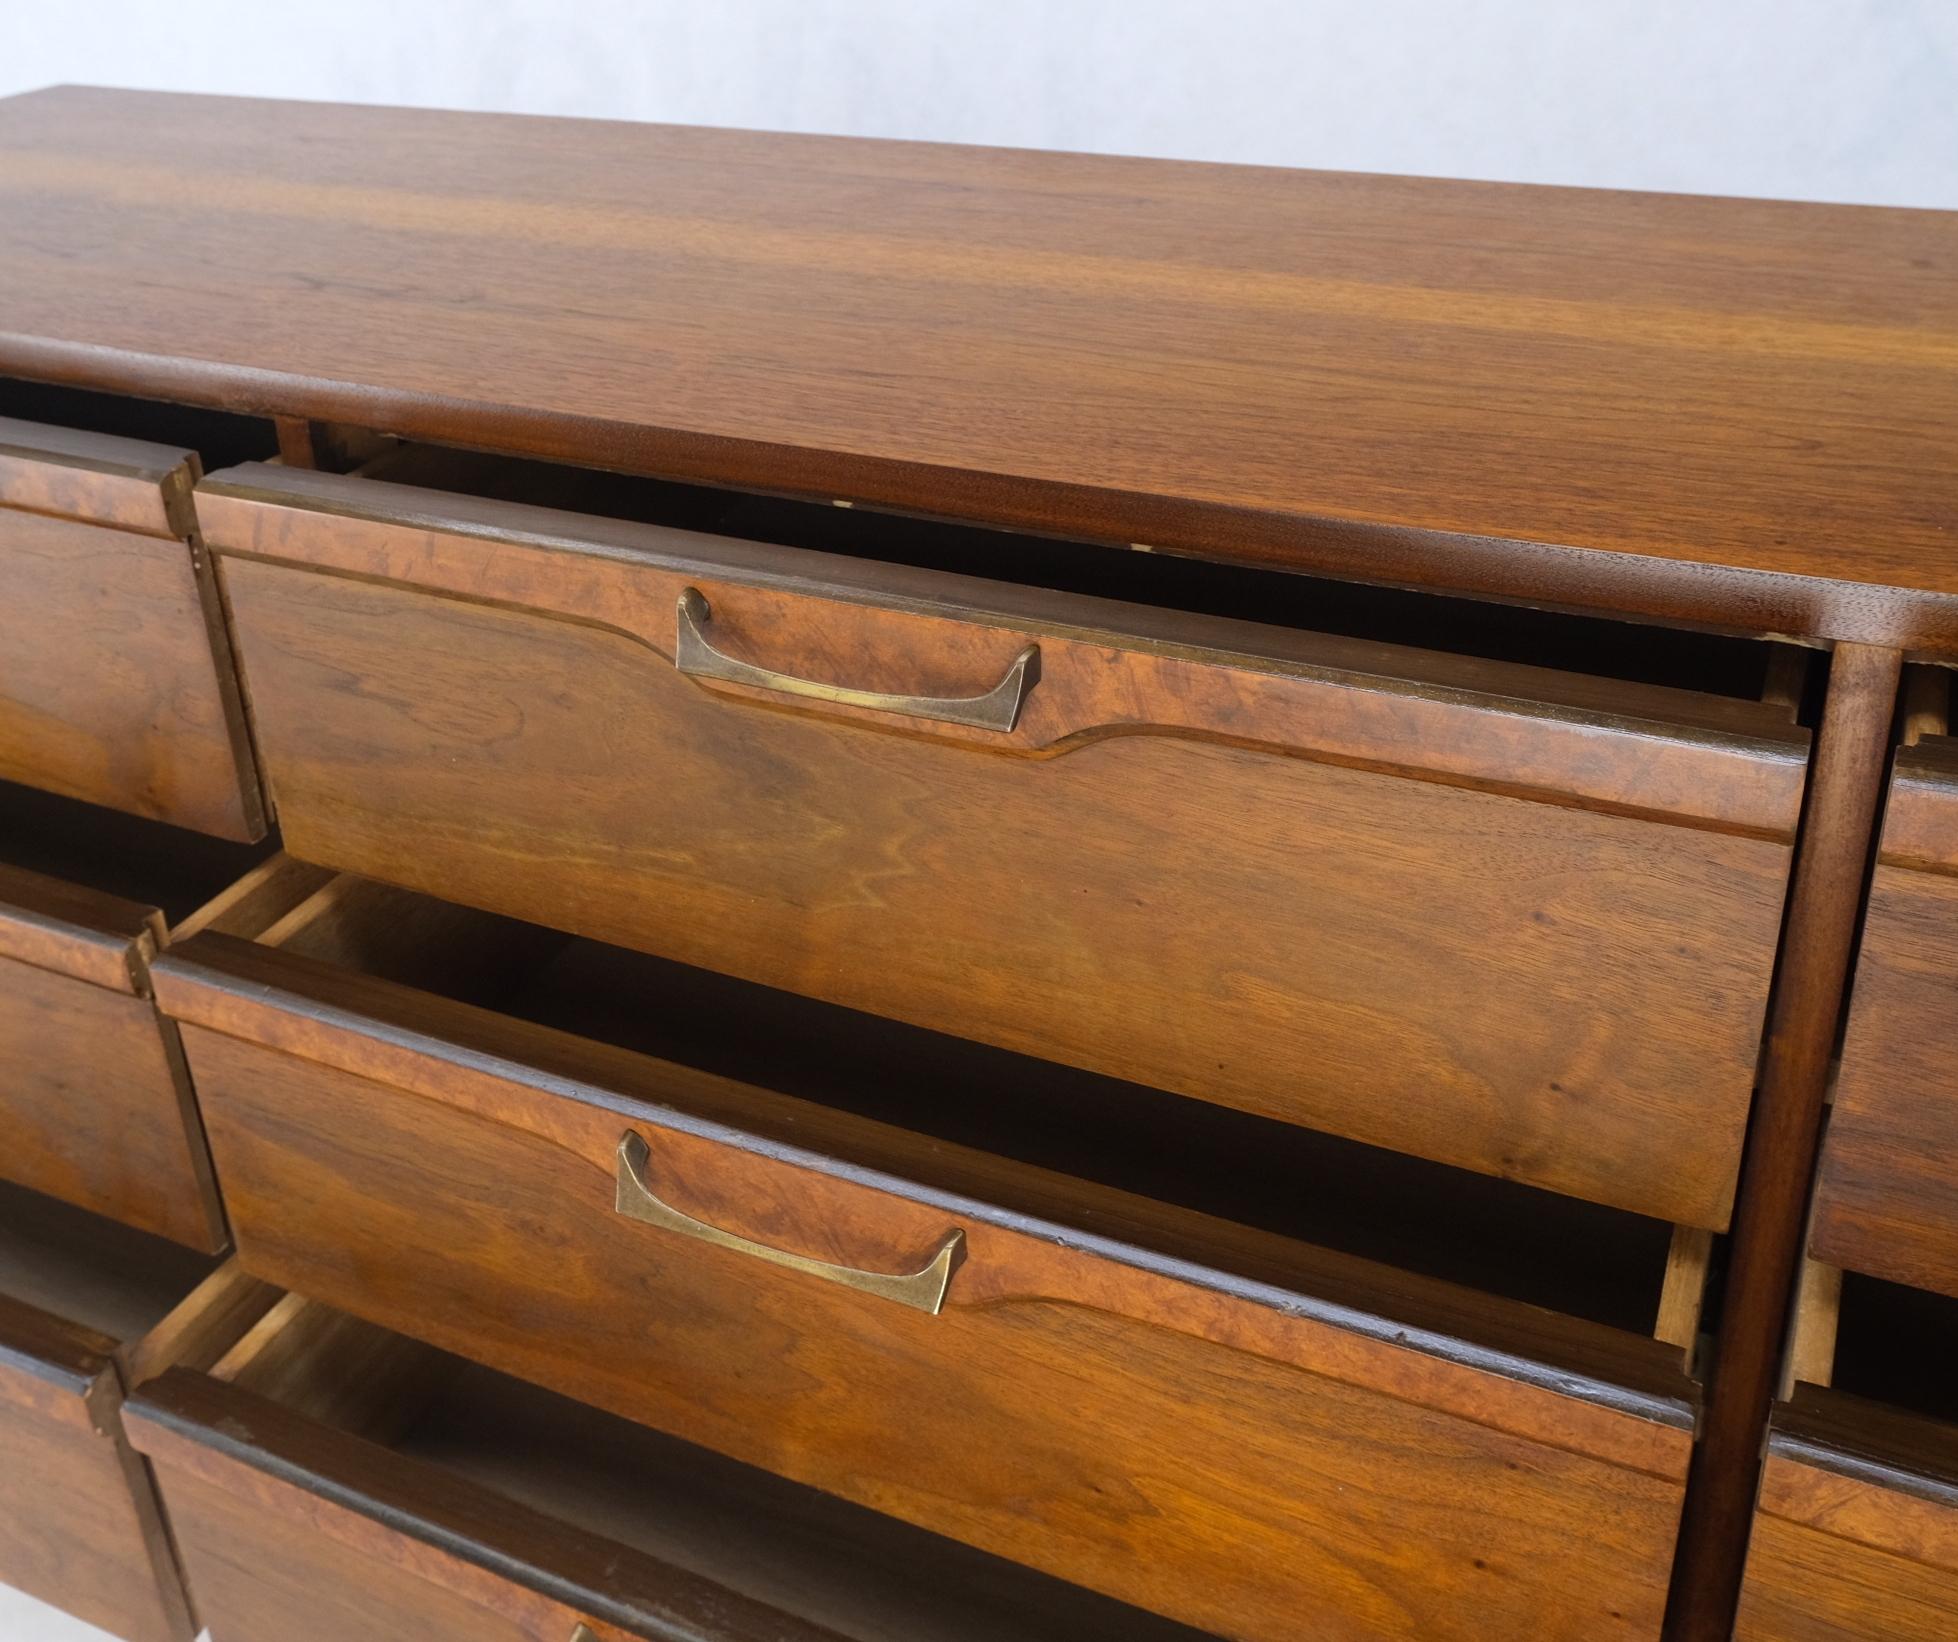 Lacquered American Walnut Burl Mid-Century Modern 9 Drawers Dresser Credenza Cabinet MINT! For Sale